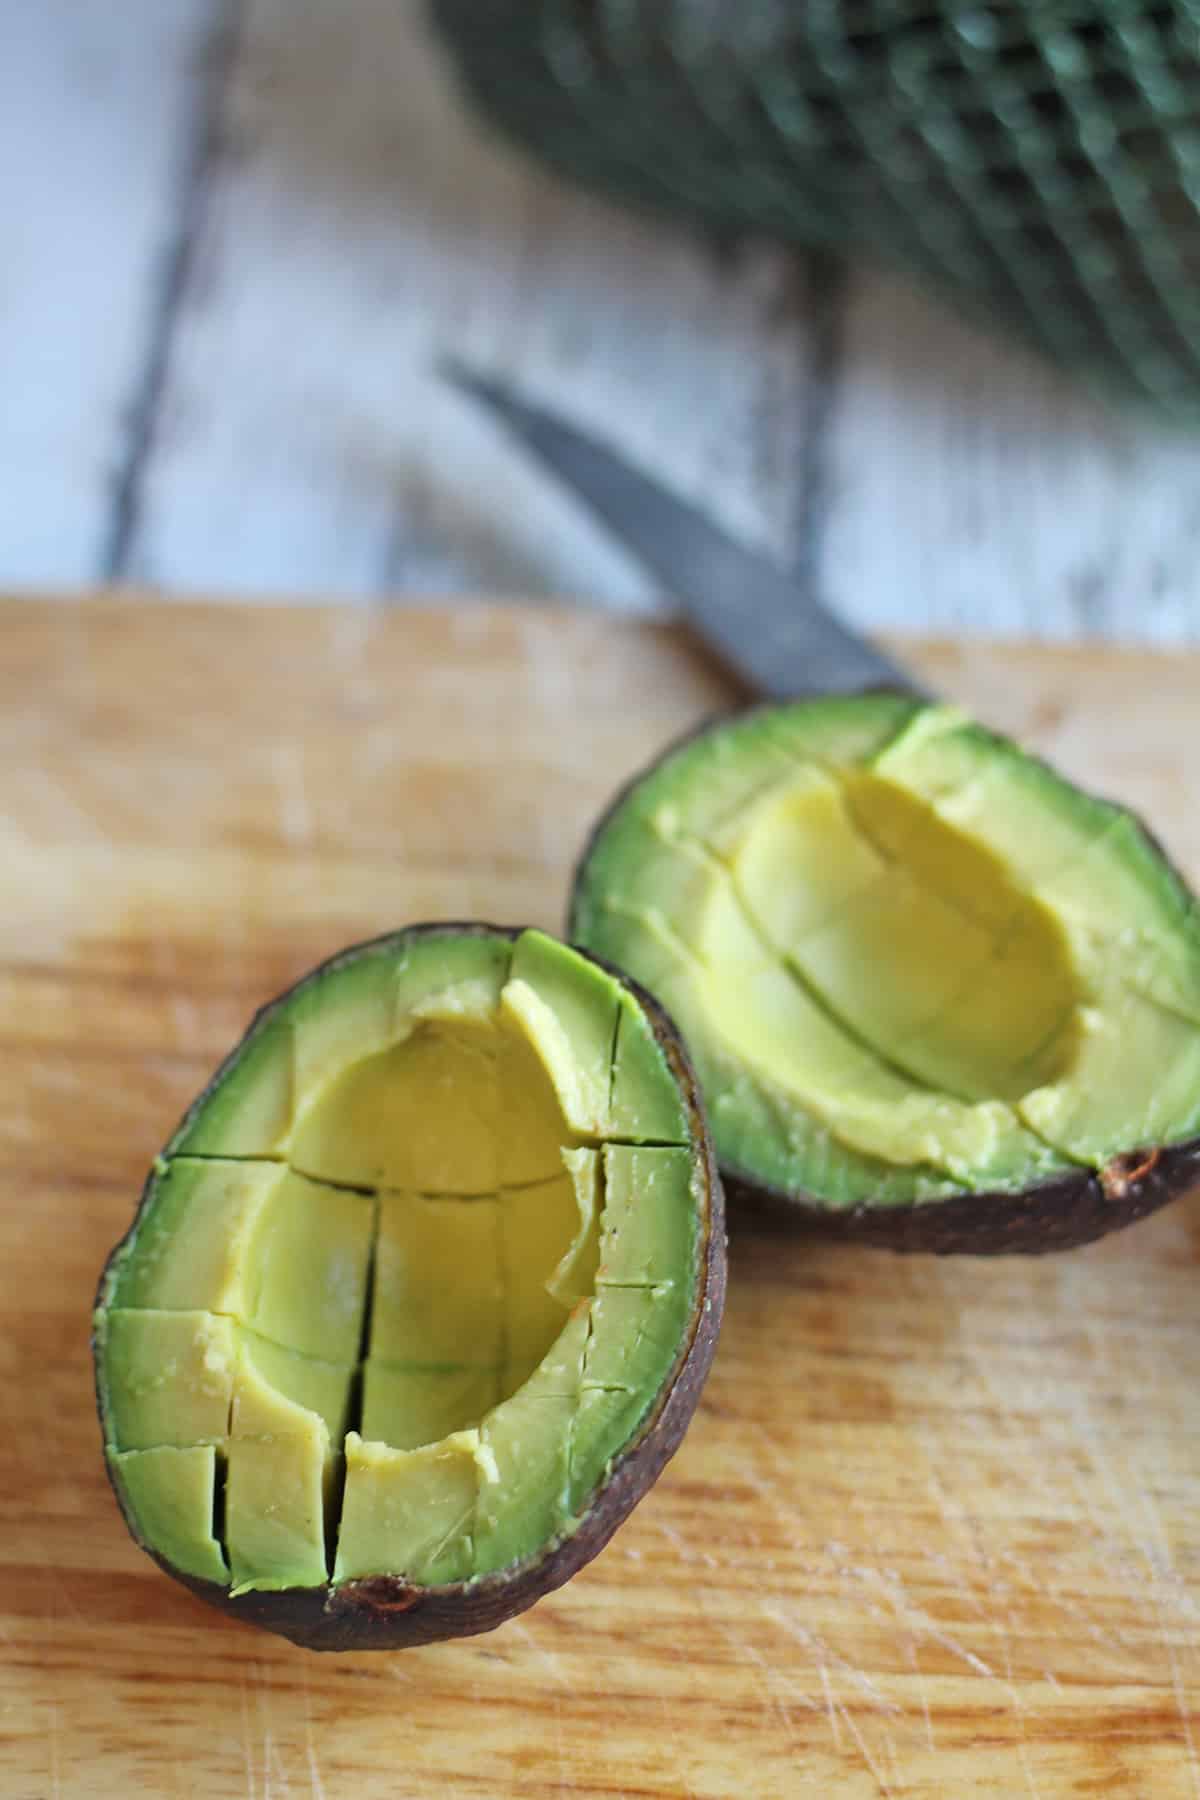 Avocado that has been scored with a knife.